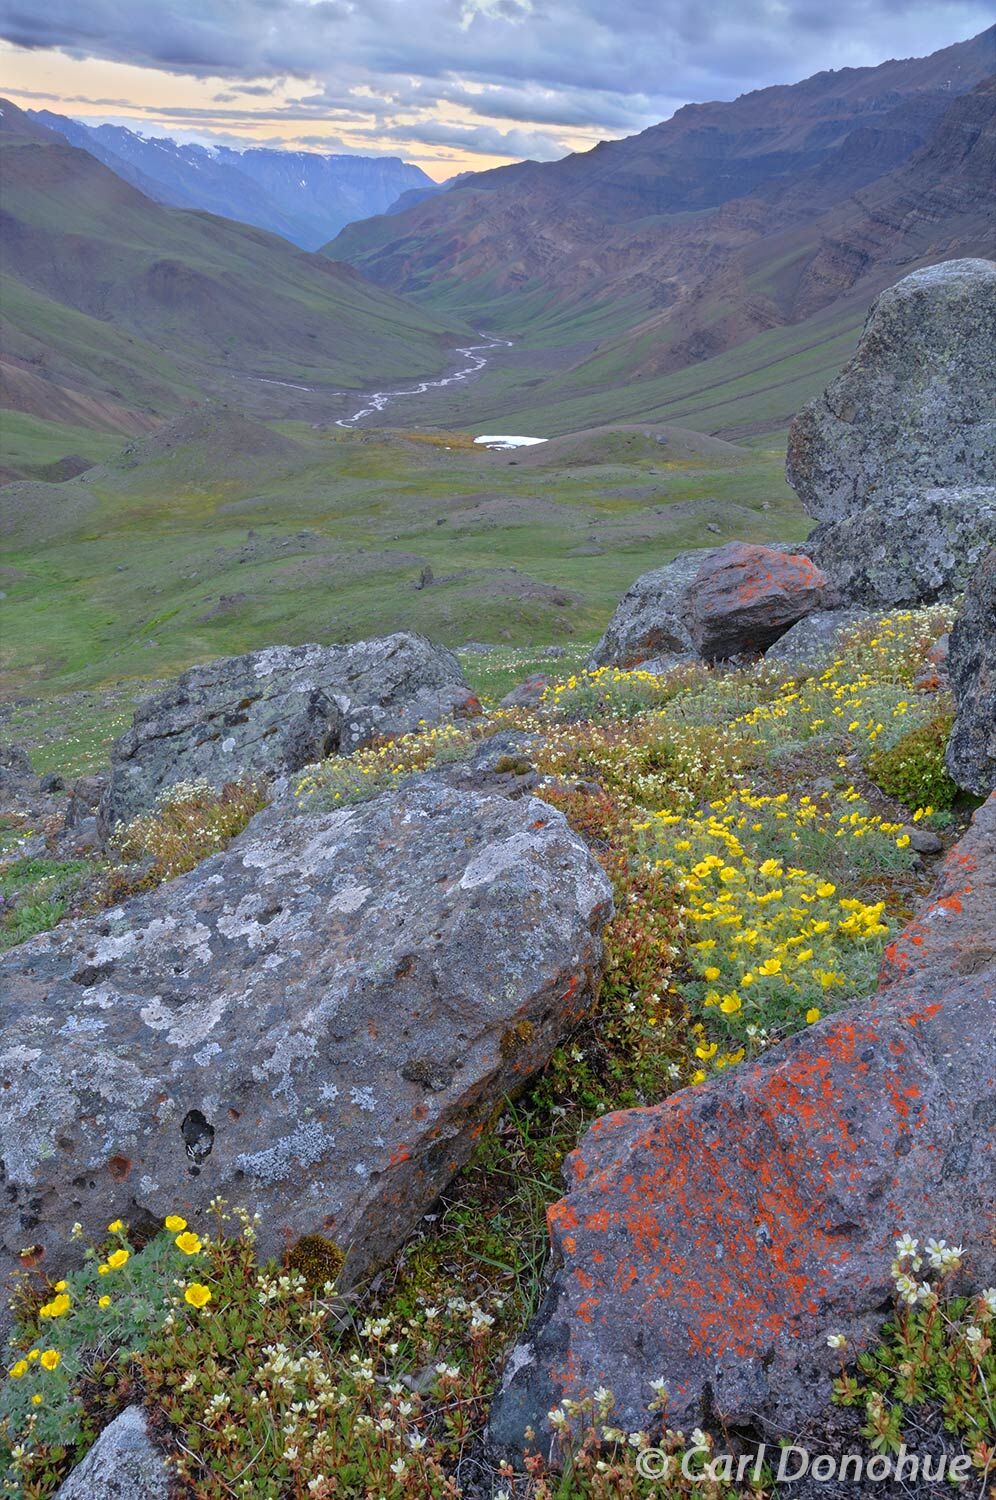 View down Chitistone Valley, or Chitistone Canyon, towards the Goat Trail, in Wrangell-St. Elias National Park and Preserve...